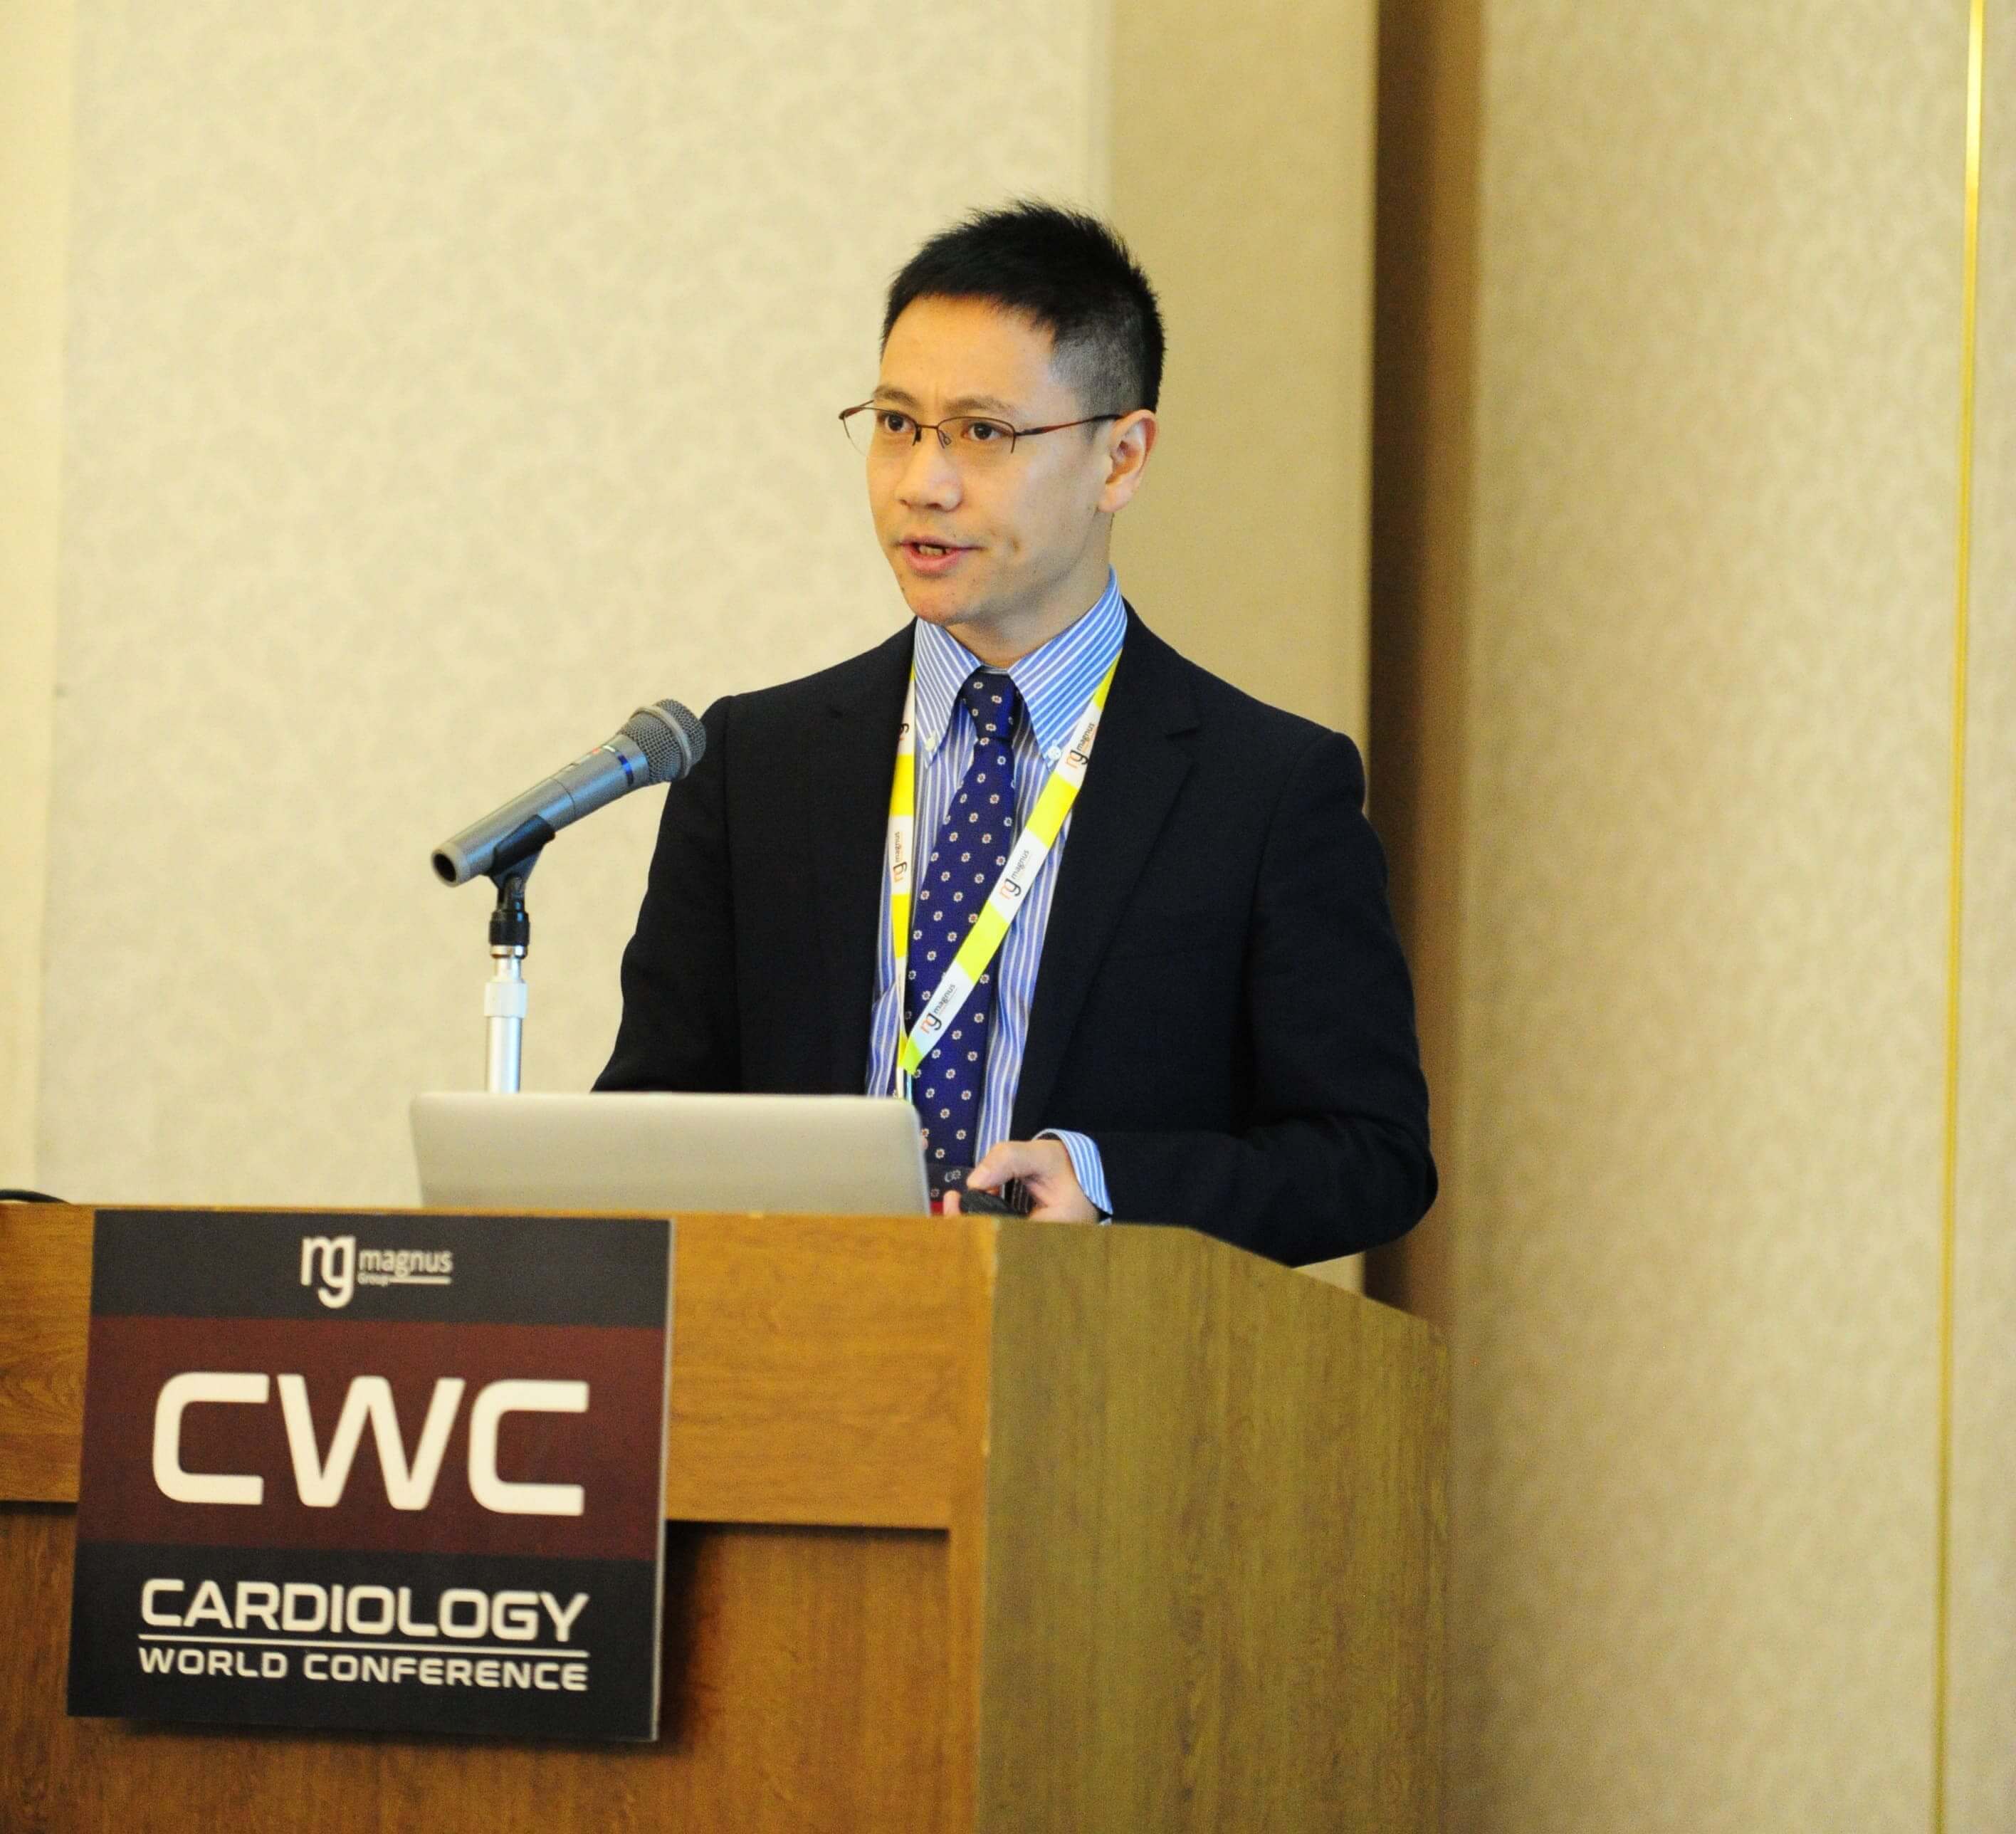 cardiology 2019 conference gallery